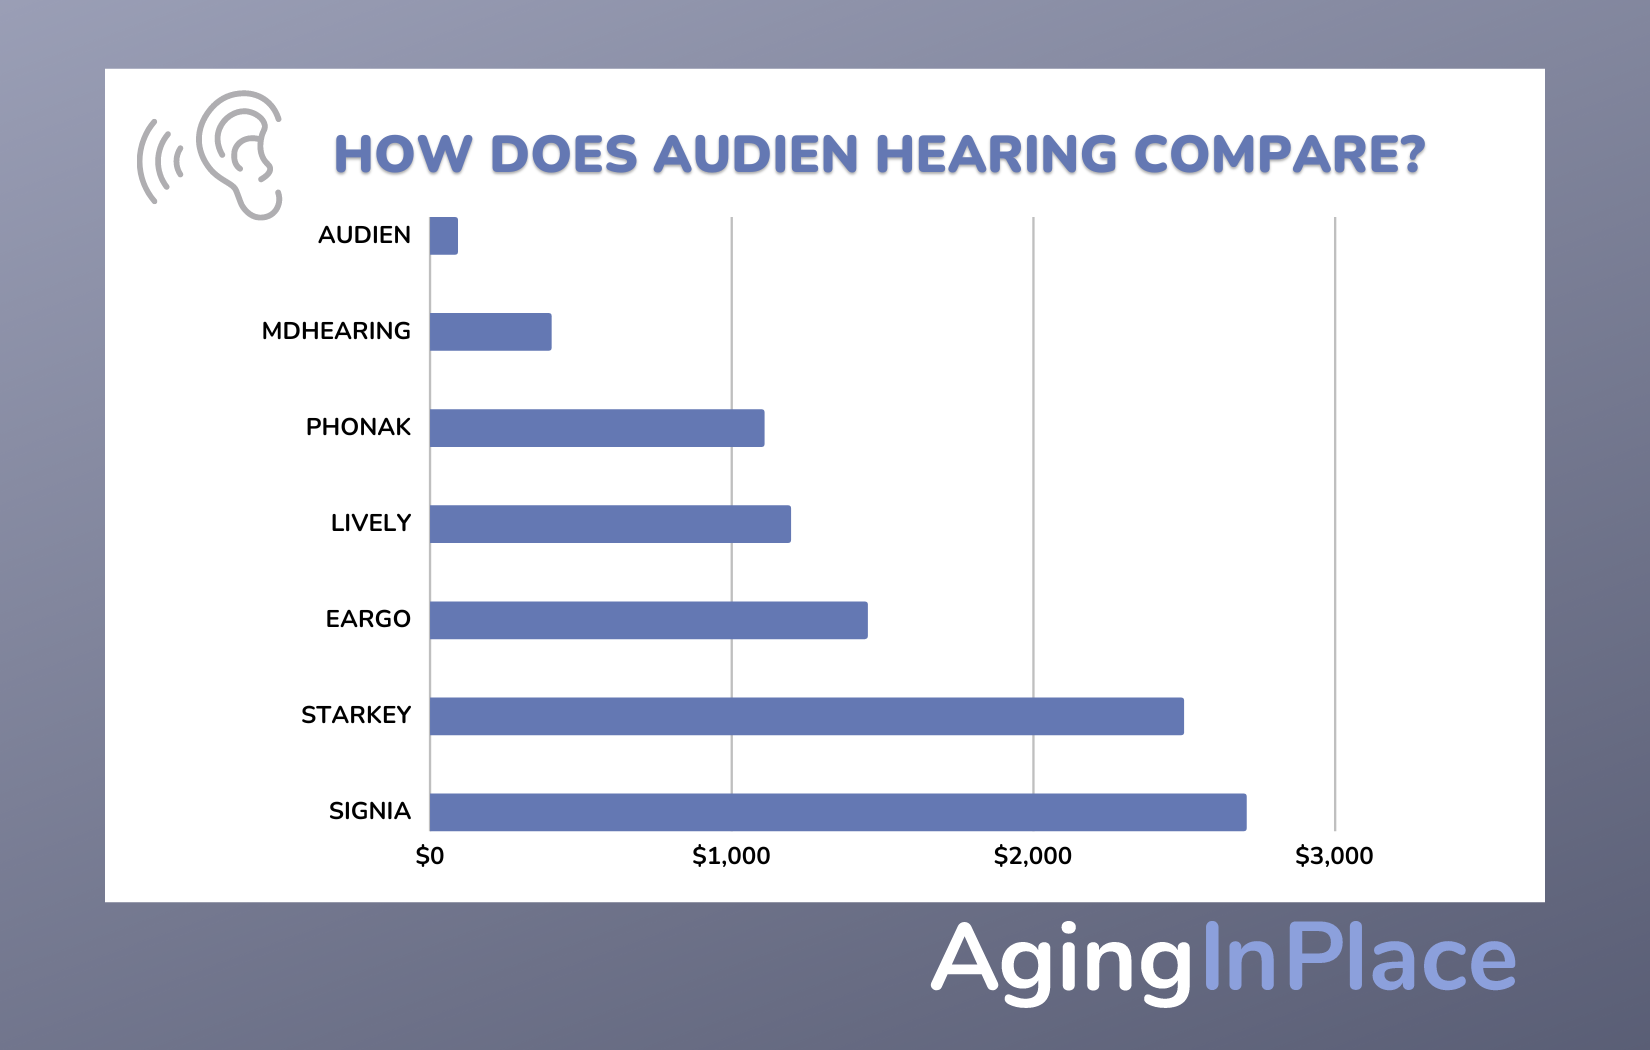 Audien hearing aids cost compared to alternative brands